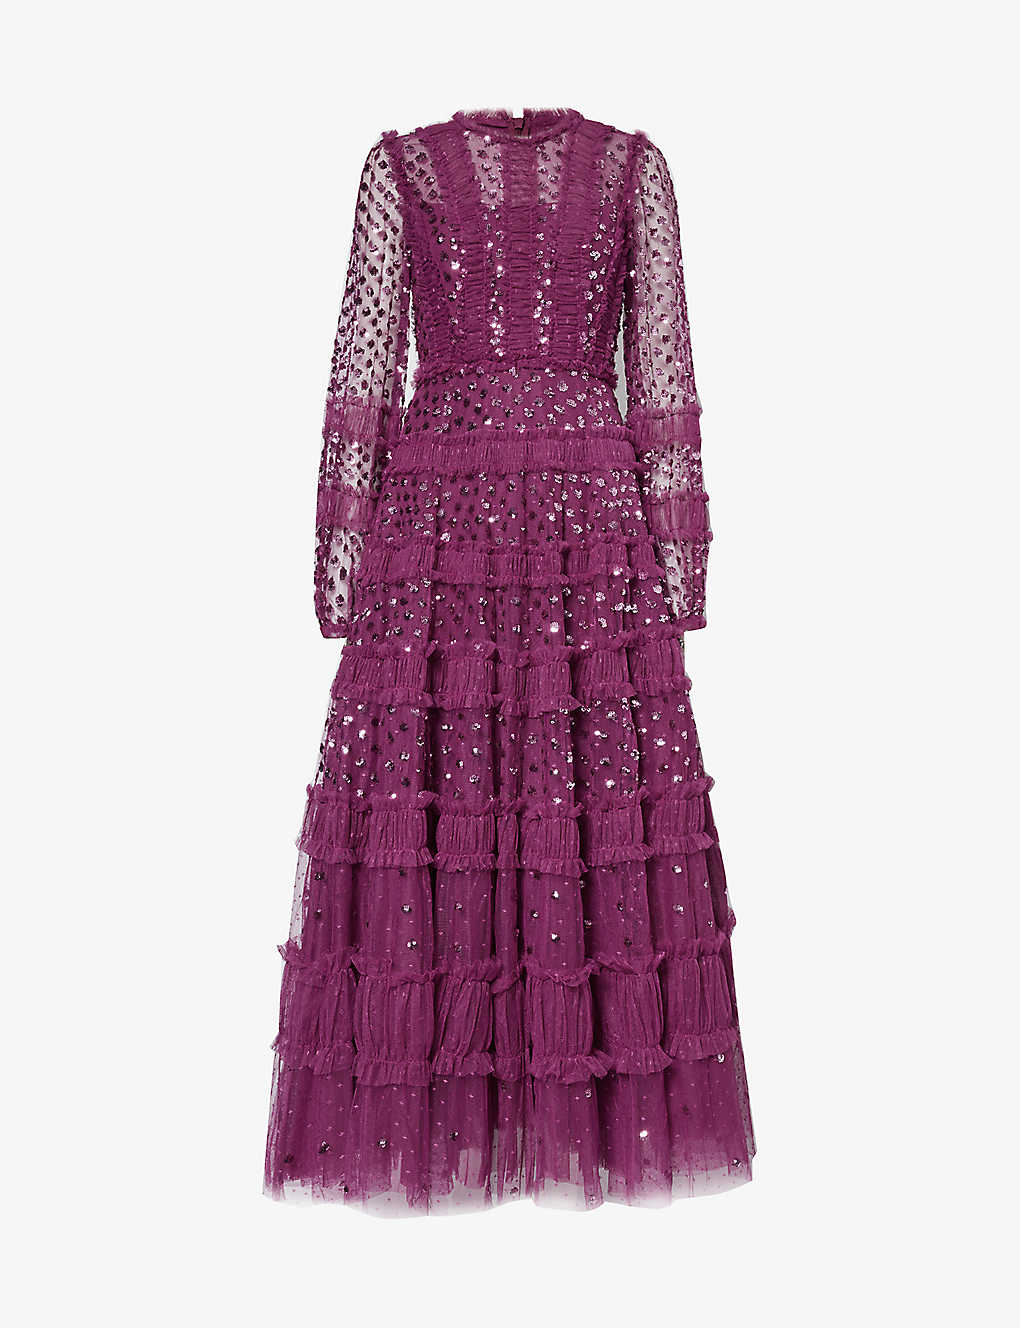 NEEDLE & THREAD NEEDLE AND THREAD WOMEN'S PLUM SHIMMER SEQUIN-EMBELLISHED RECYCLED-POLYESTER MAXI DRESS